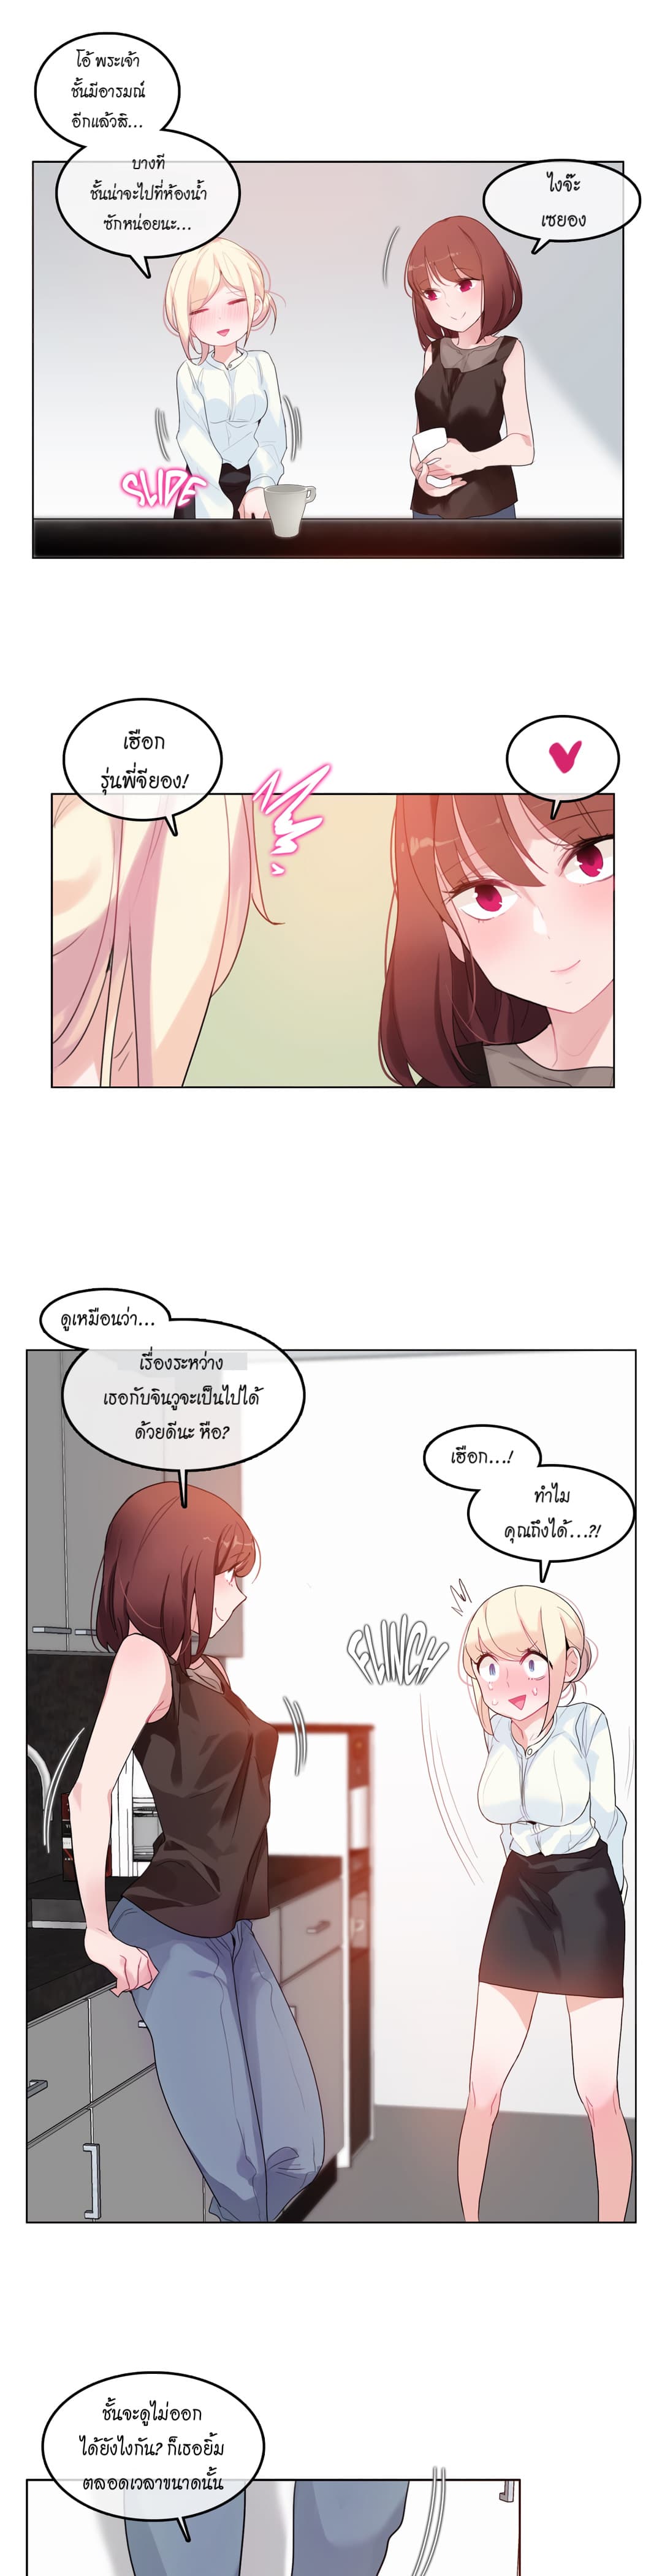 A Pervert’s Daily Life 32 (7)